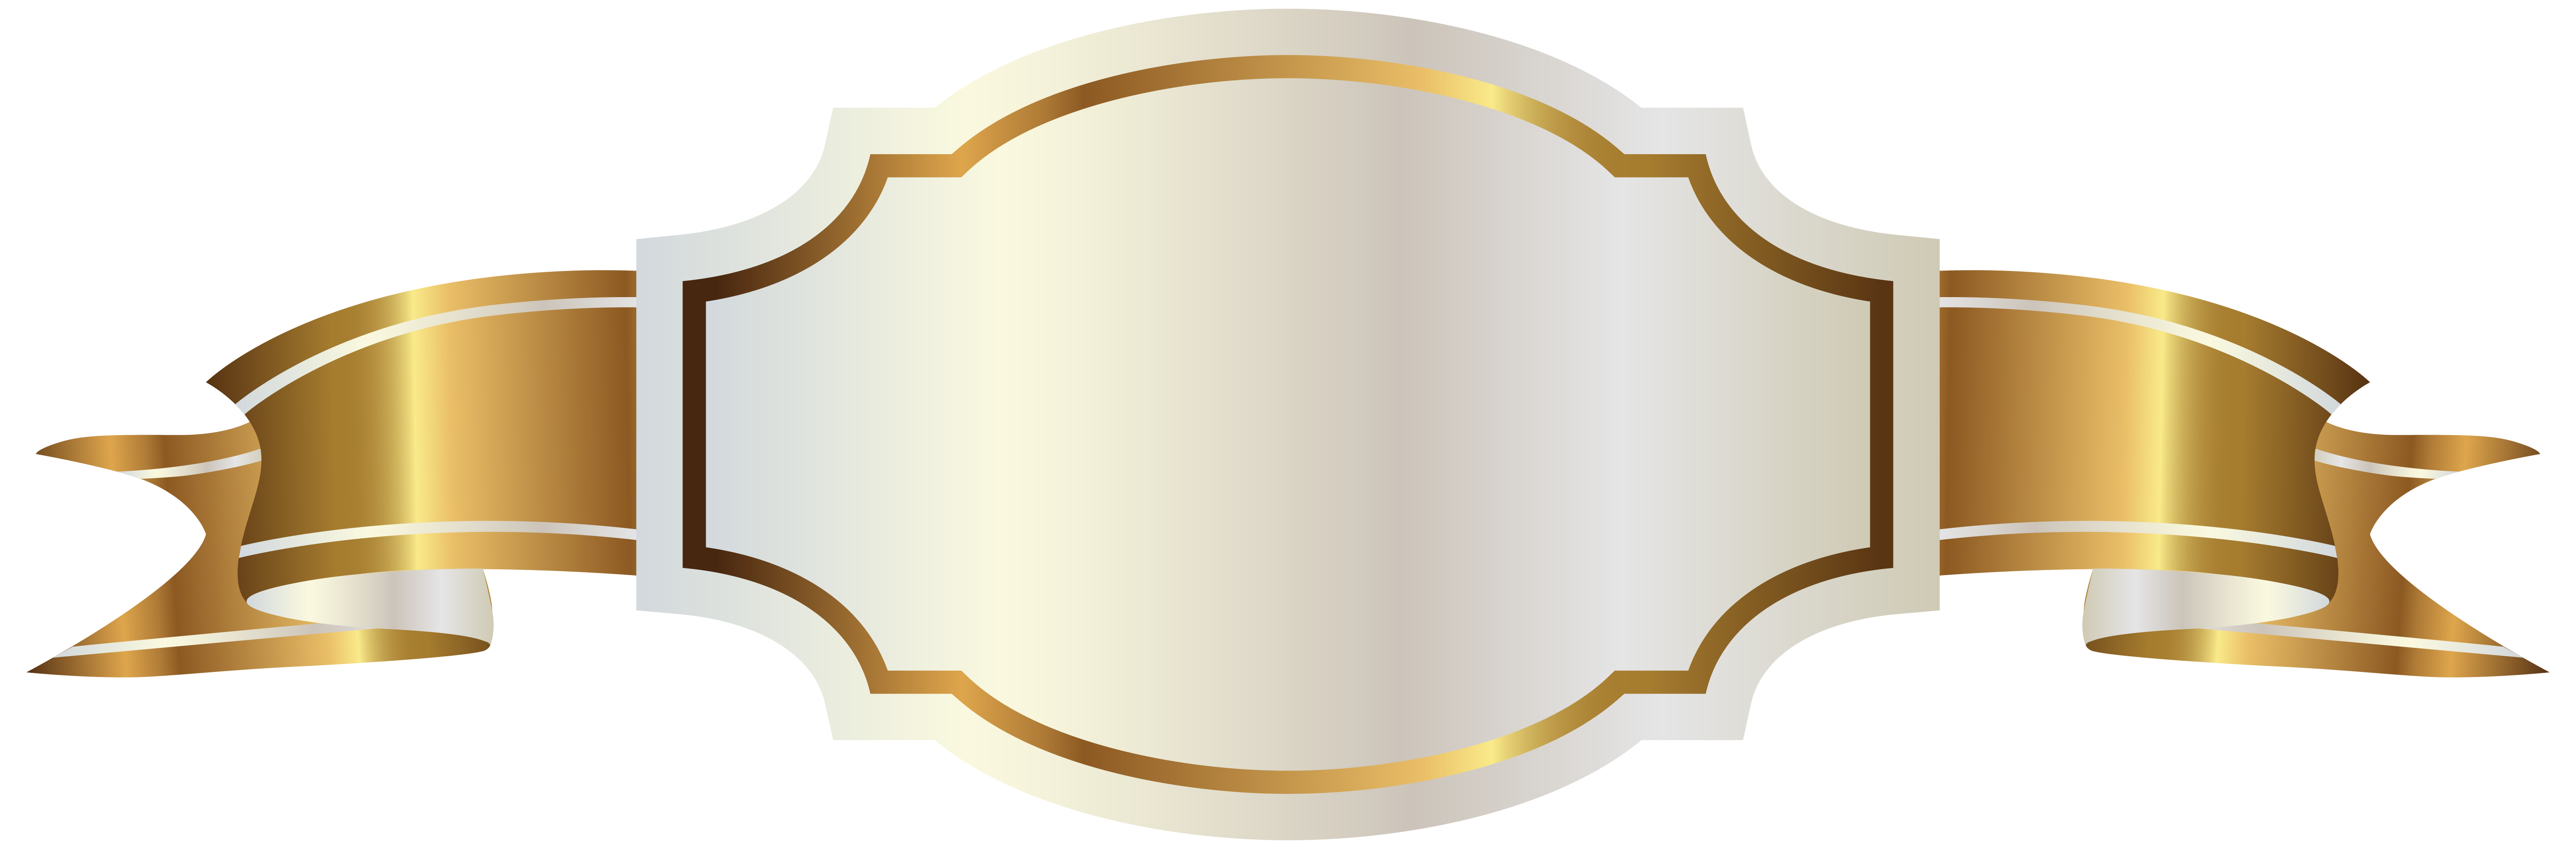 Diploma clipart graphic. White label and gold